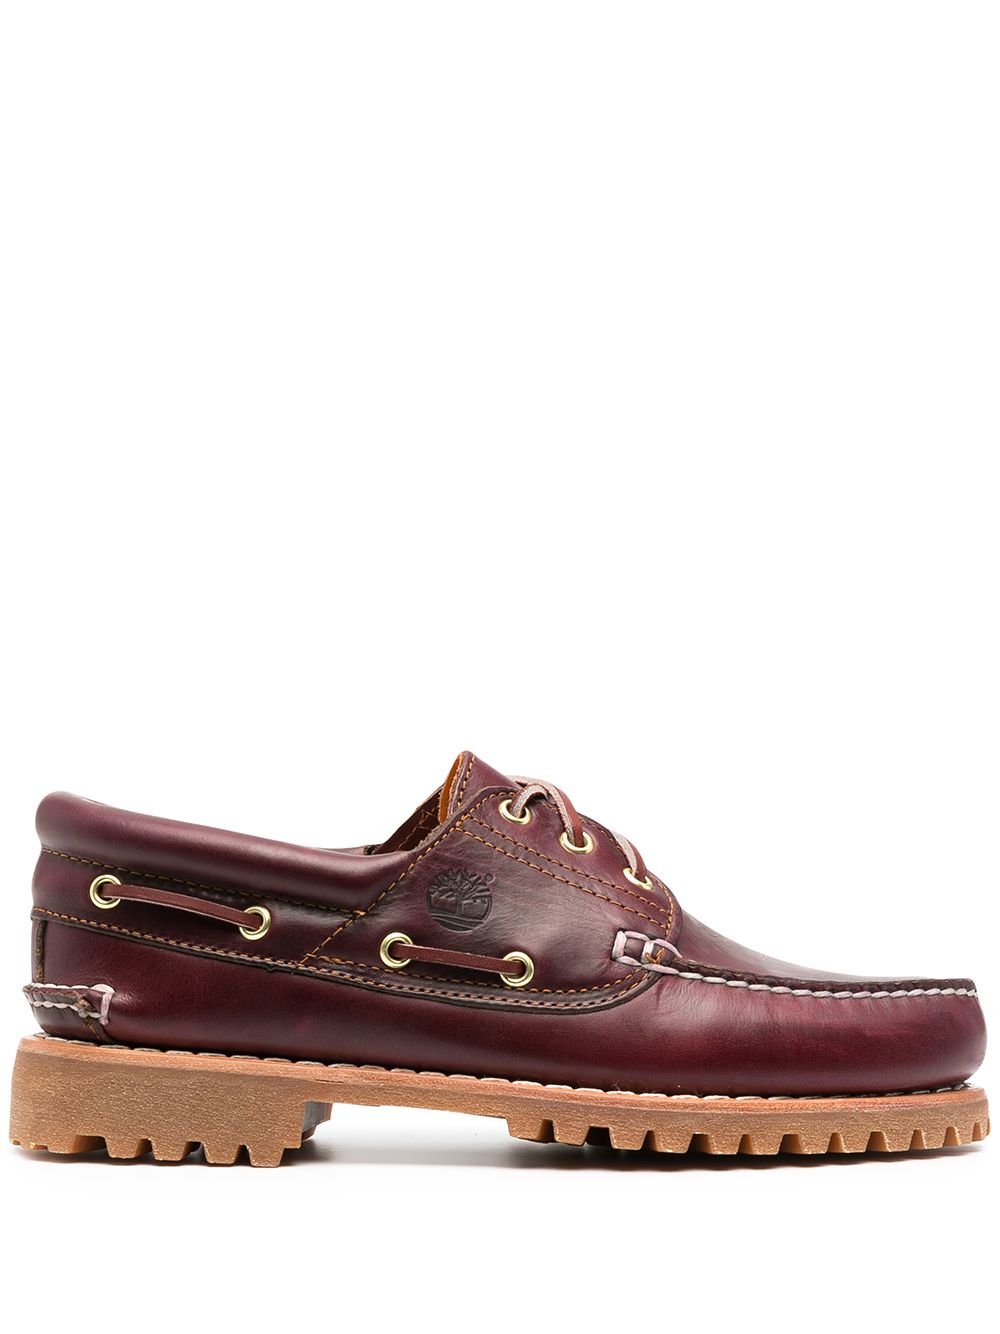 Timberland 3-Eye Classic lug shoes - Red von Timberland